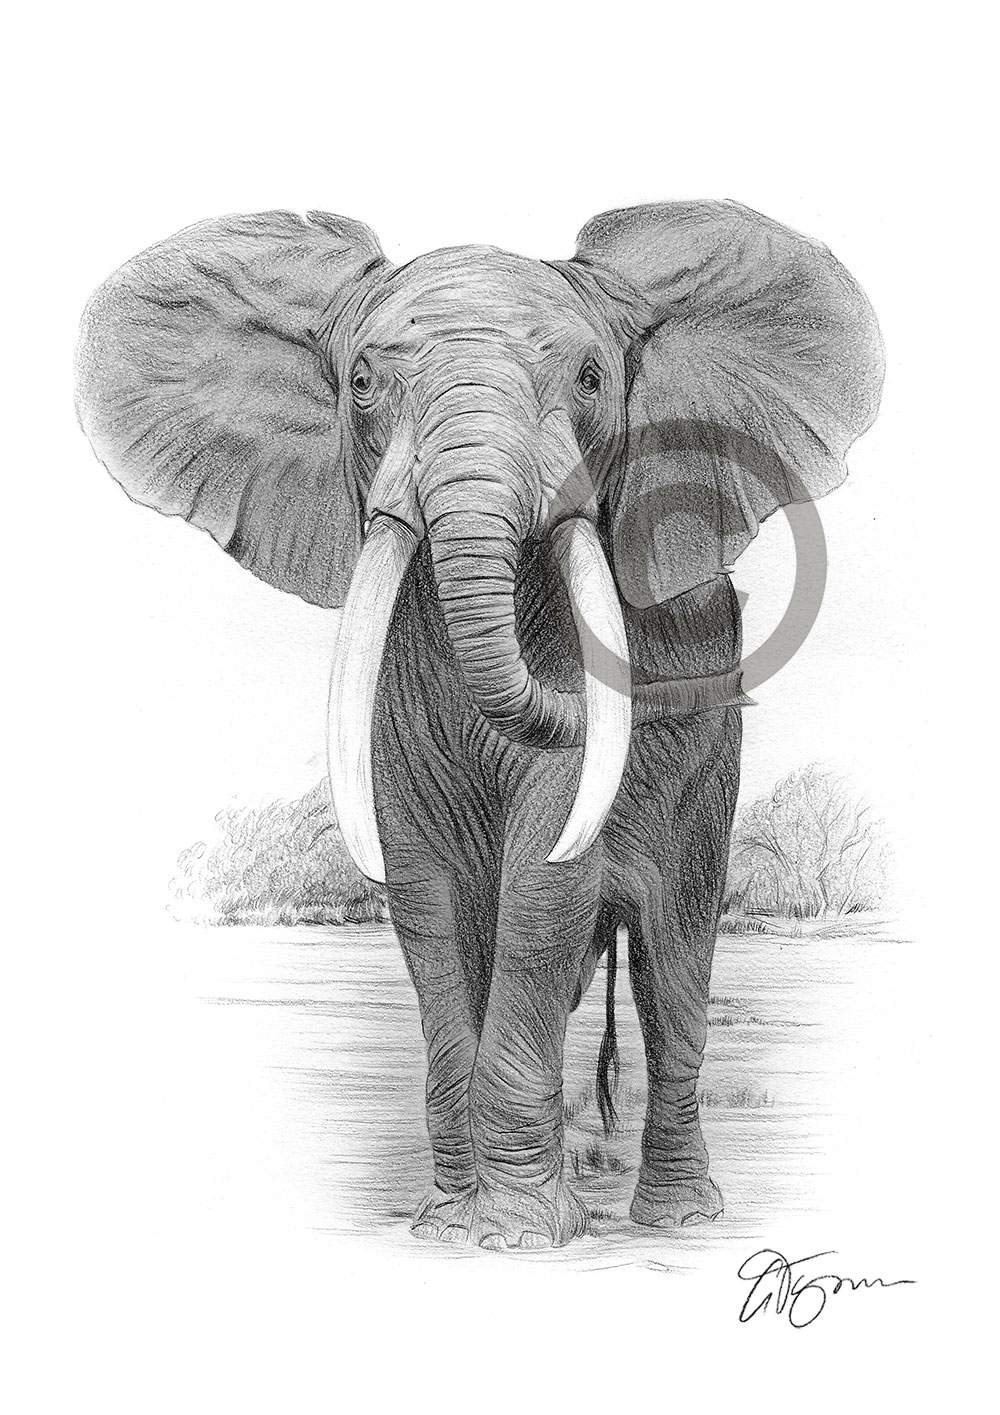 Pencil drawing of an African elephant by artist Gary Tymon